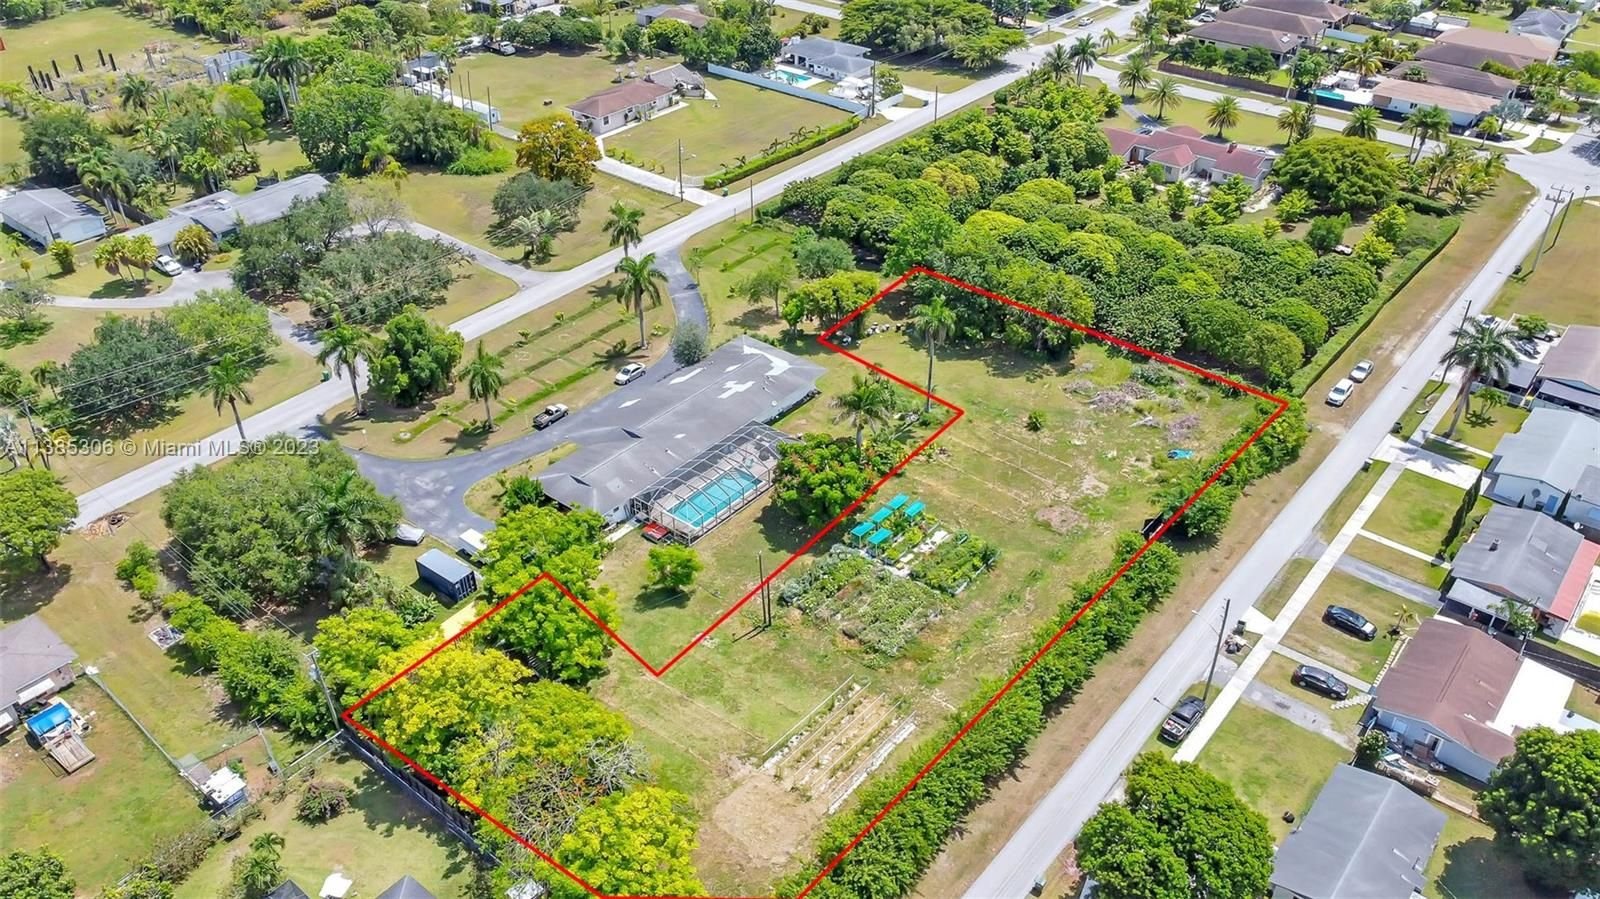 Real estate property located at Homestead Florida, Miami-Dade County, Redland, Homestead, FL